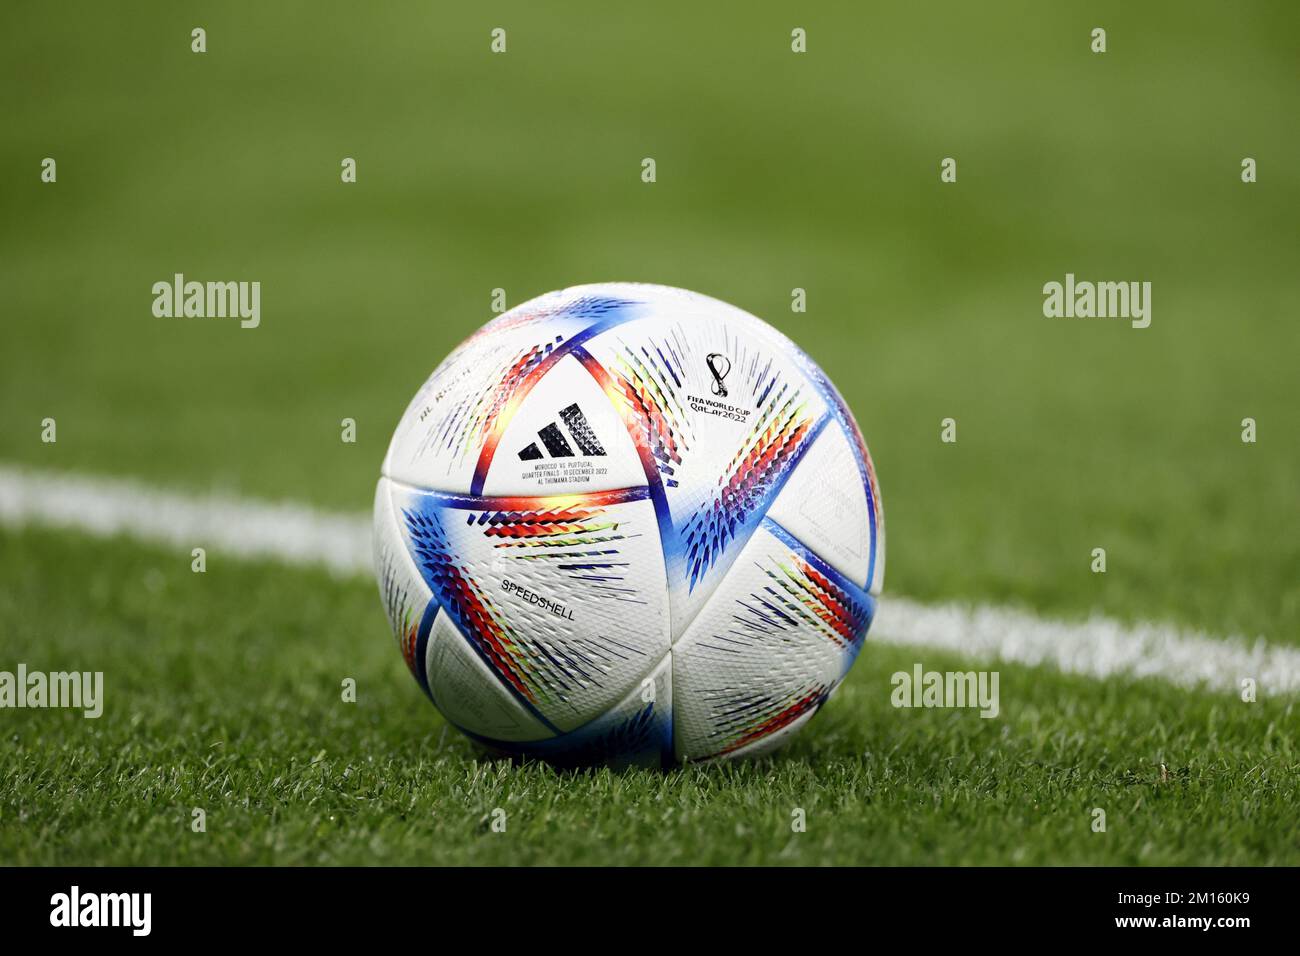 DOHA - Qatar, 10/12/2022,DOHA - World Cup ball during the FIFA World Cup Qatar 2022 quarterfinal match between Morocco and Portugal at Al Thumama Stadium on December 10, 2022 in Doha, Qatar. ANP KOEN VAN WEEL netherlands out - belgium out Credit: ANP/Alamy Live News Stock Photo